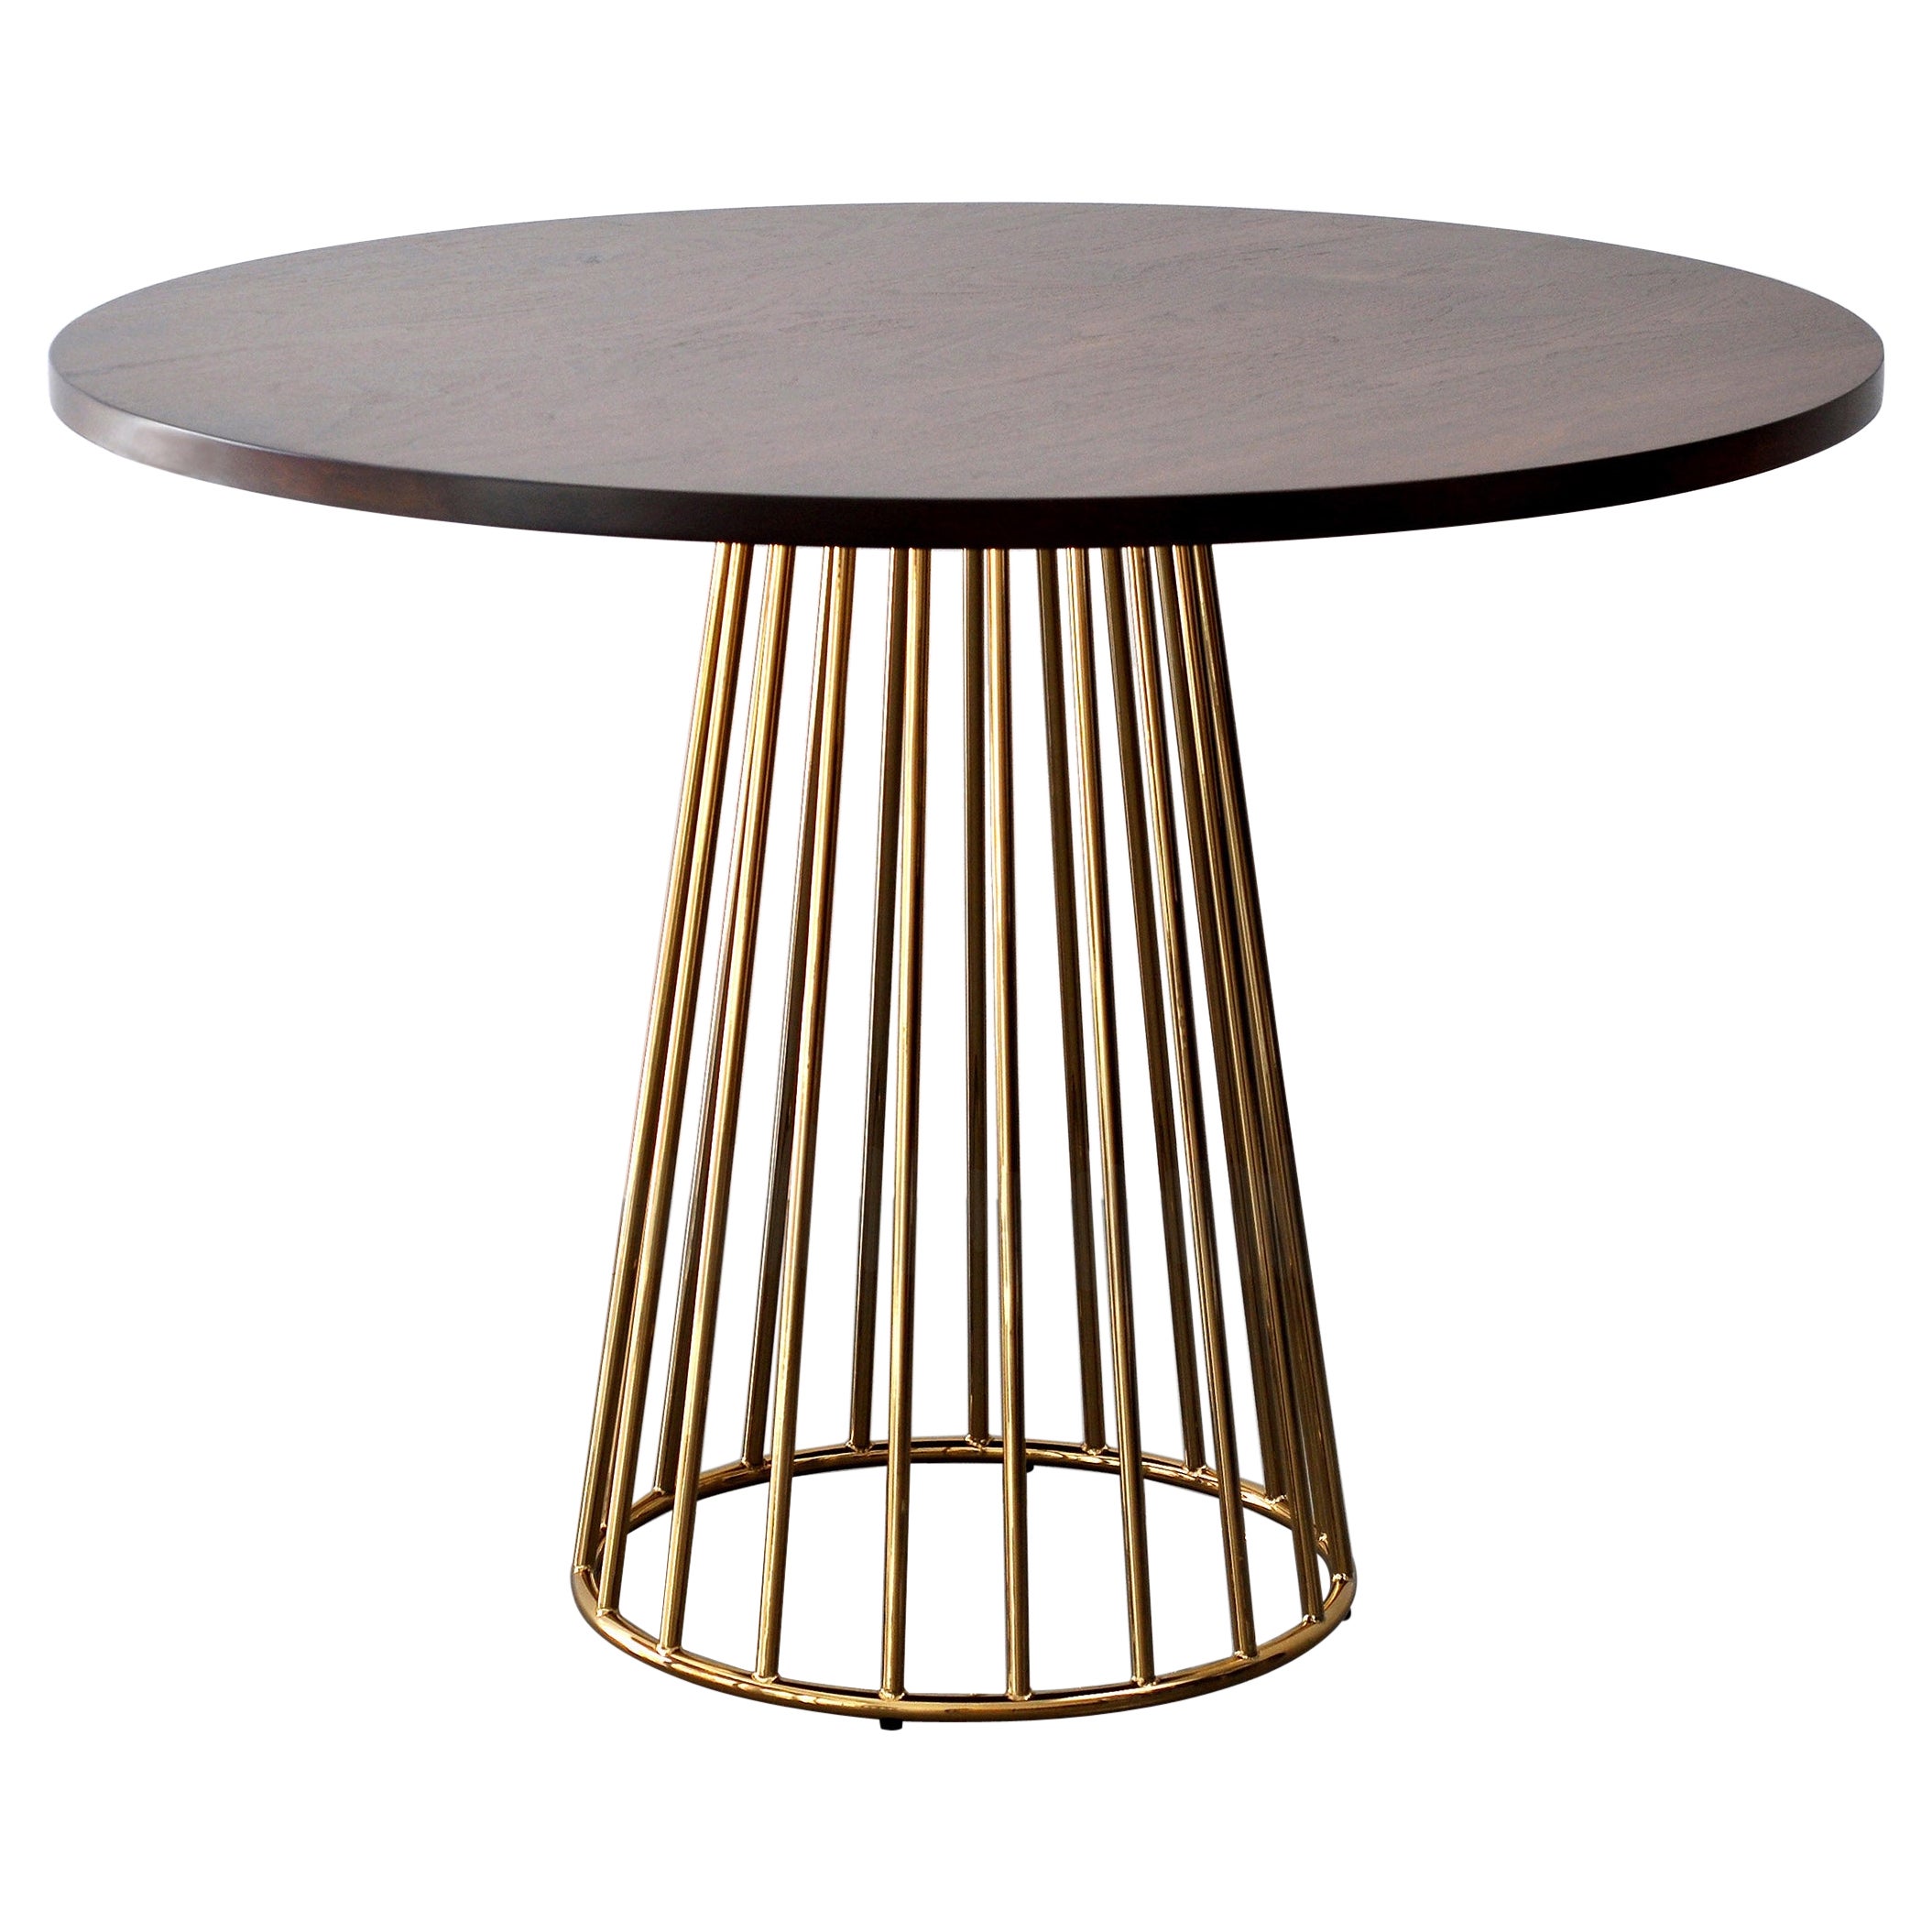 Wired Café Table by Phase Design